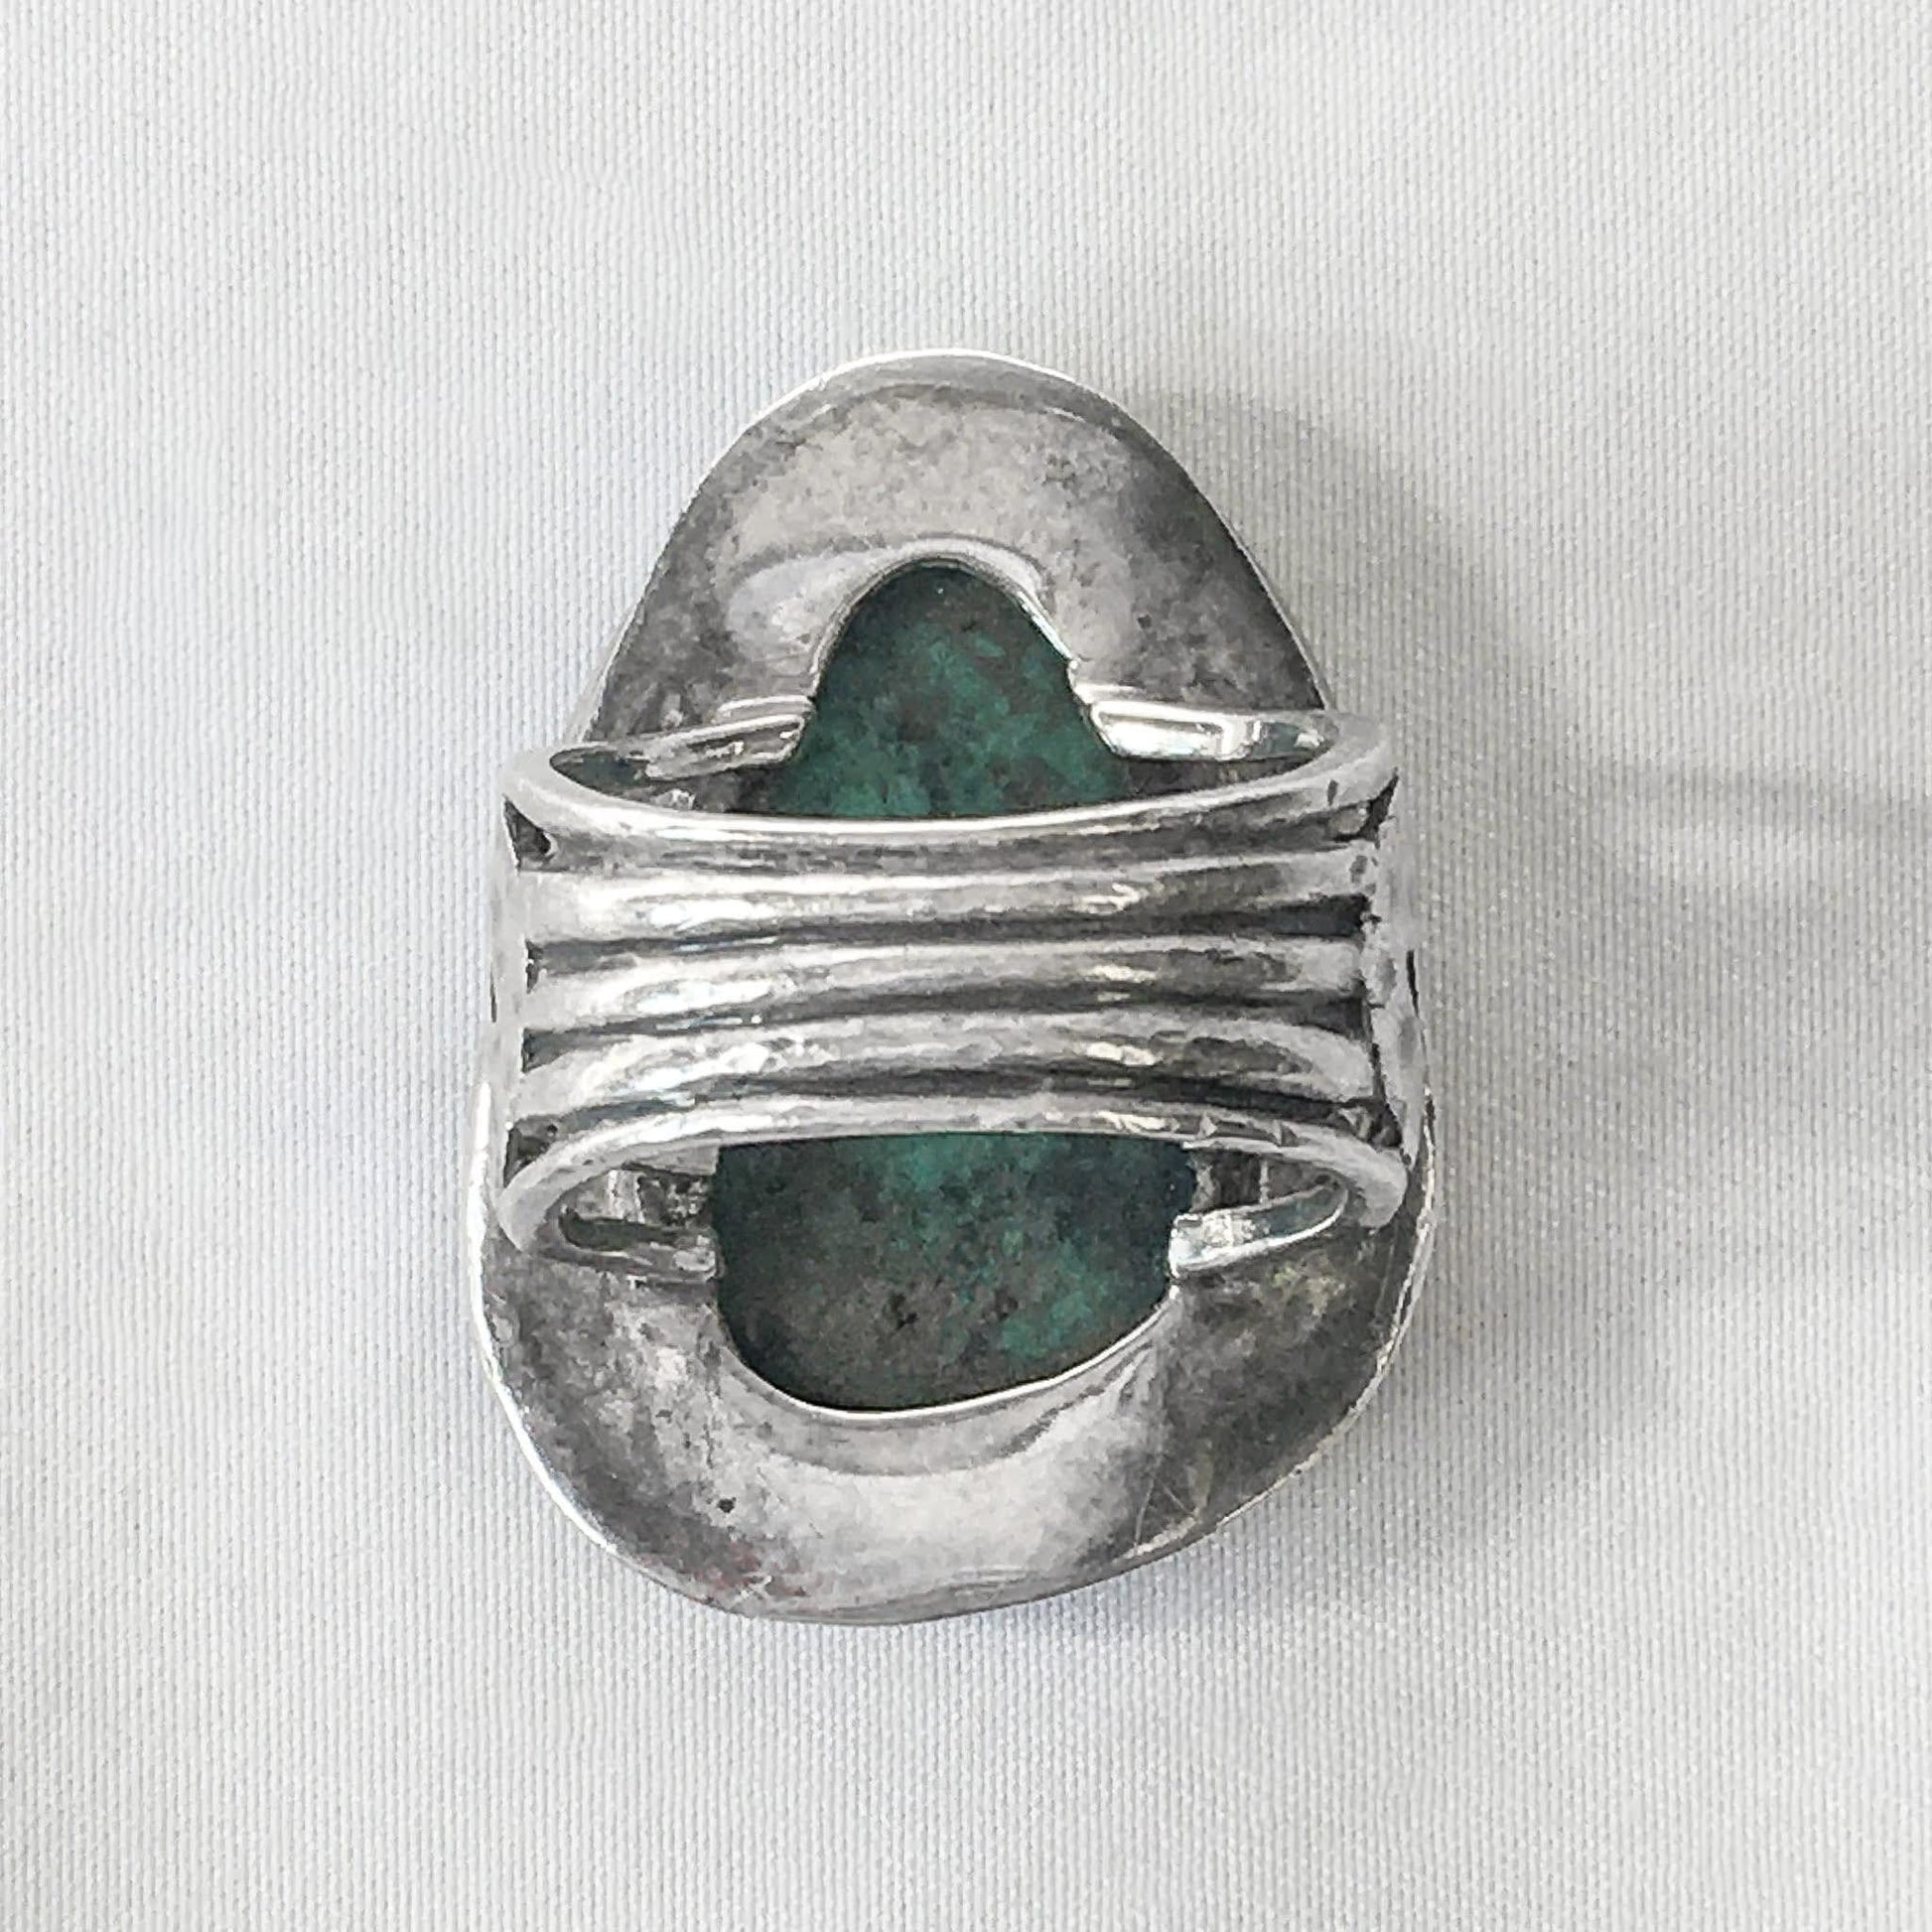 Vintage 925 India SILPADA Turquoise Stone Ring, Statement Ring, Vintage Silver Ring, APPROX. Size 7.75